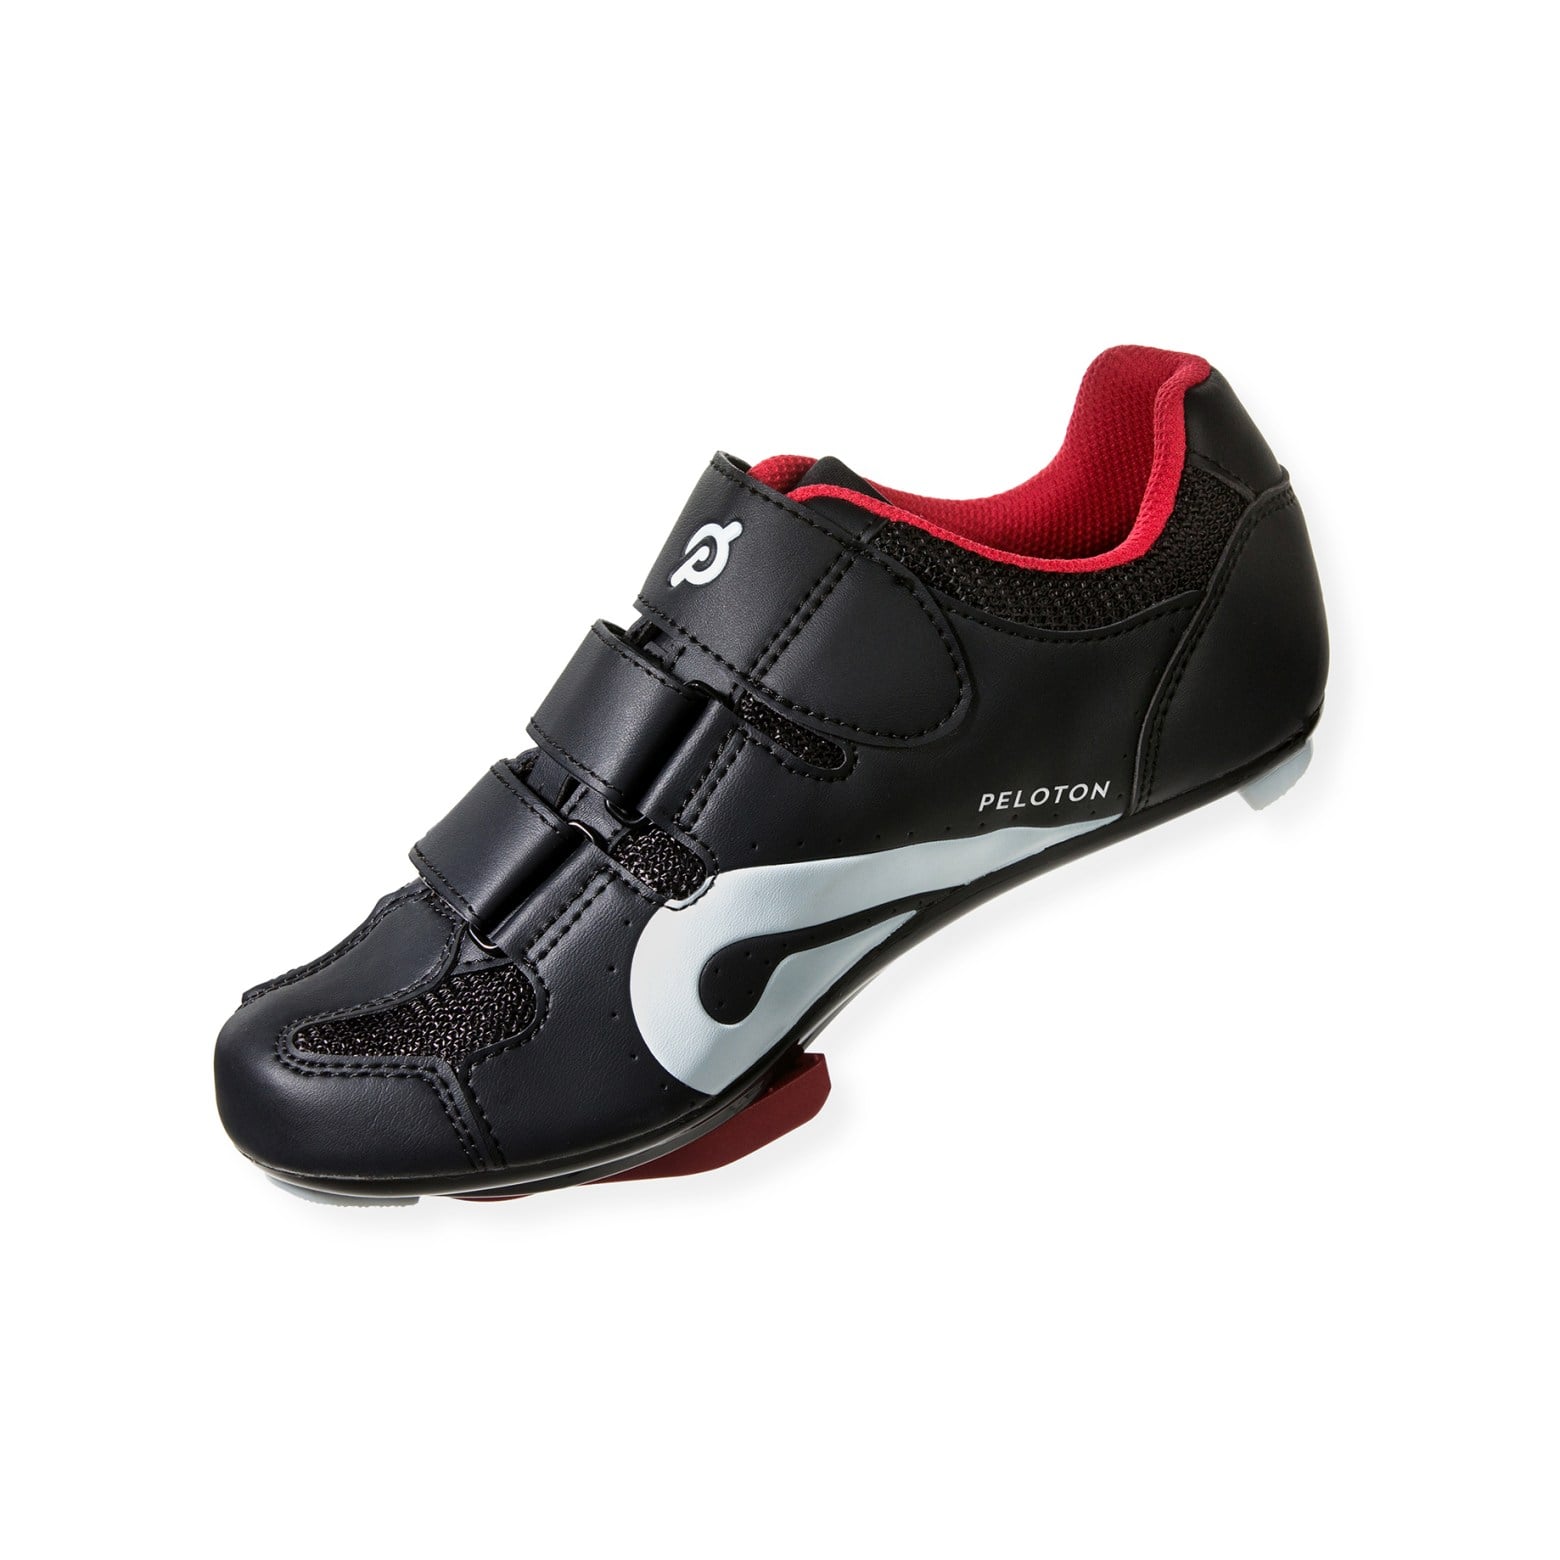 Can You Wear Any Cycling Shoes With Peloton? 